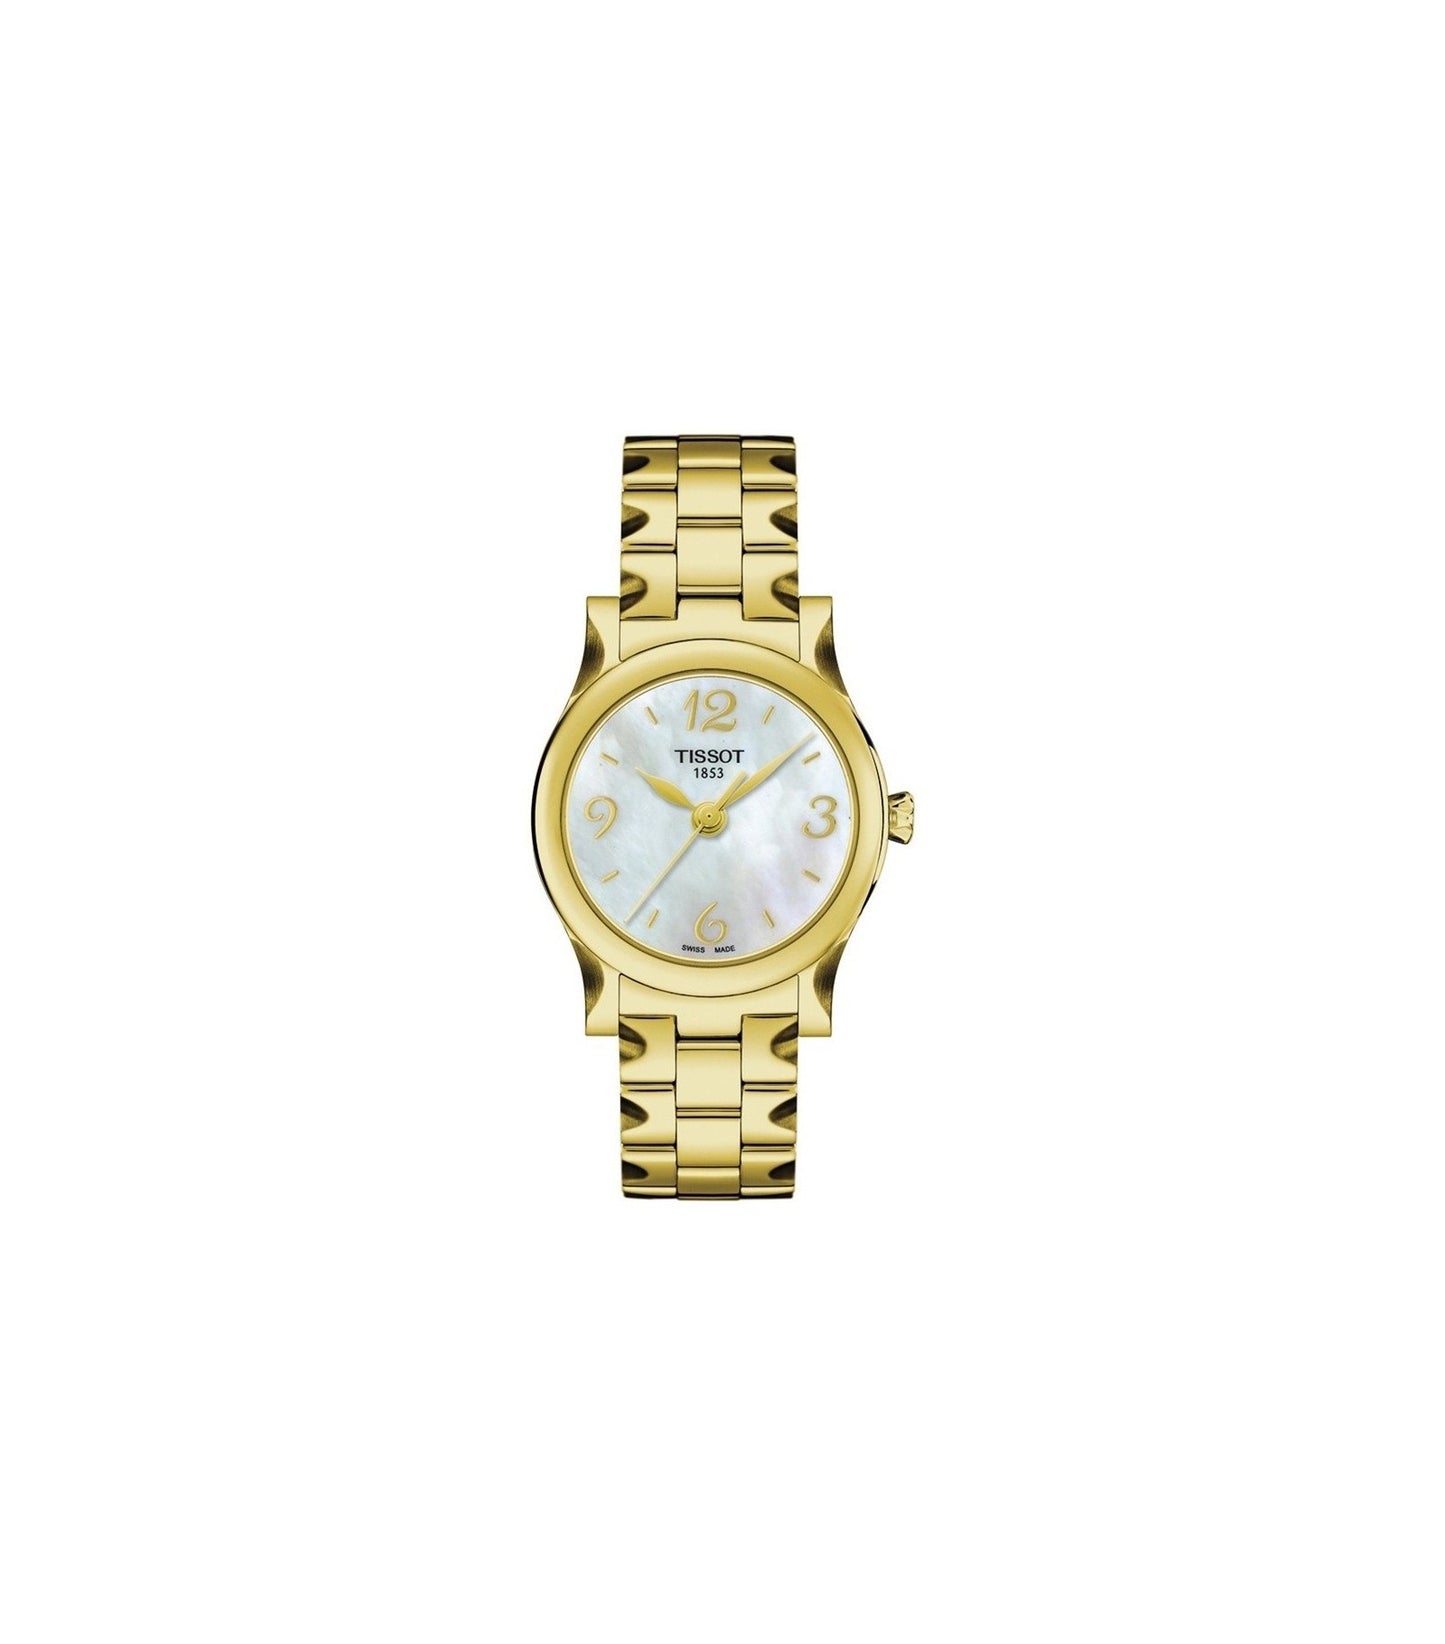 Tissot Swiss Made T-Wave Stylist-T Ladies' MOP Gold Plated Watch T0282103311700 - Diligence1International